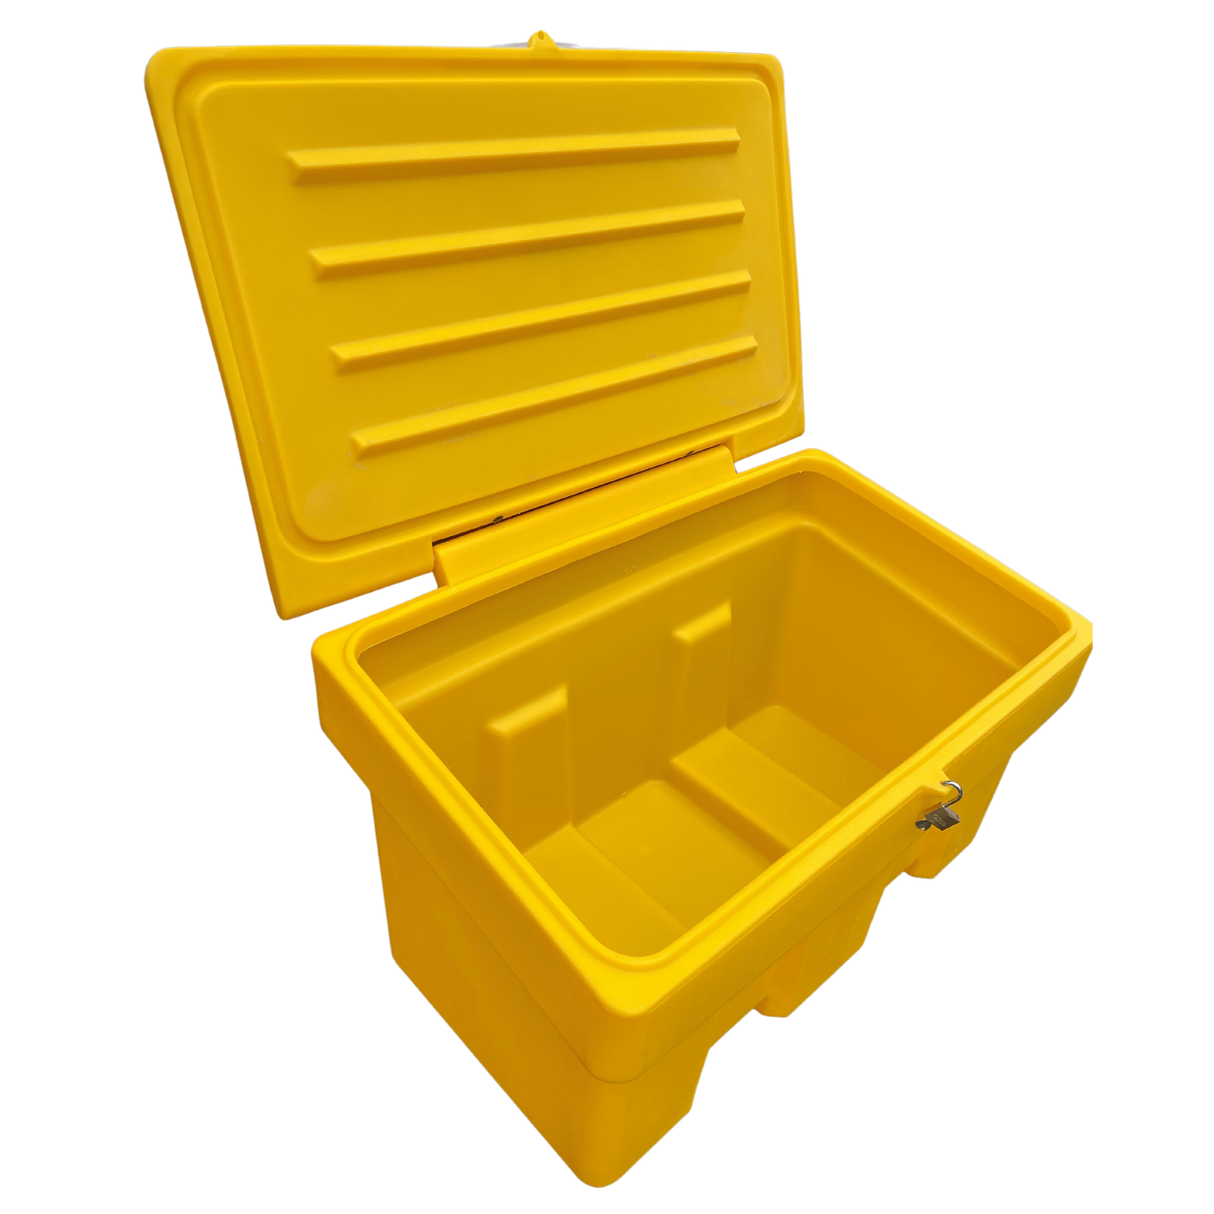 Rock Salt Grit Bins, Nationwide Fast Delivery from Dandy's